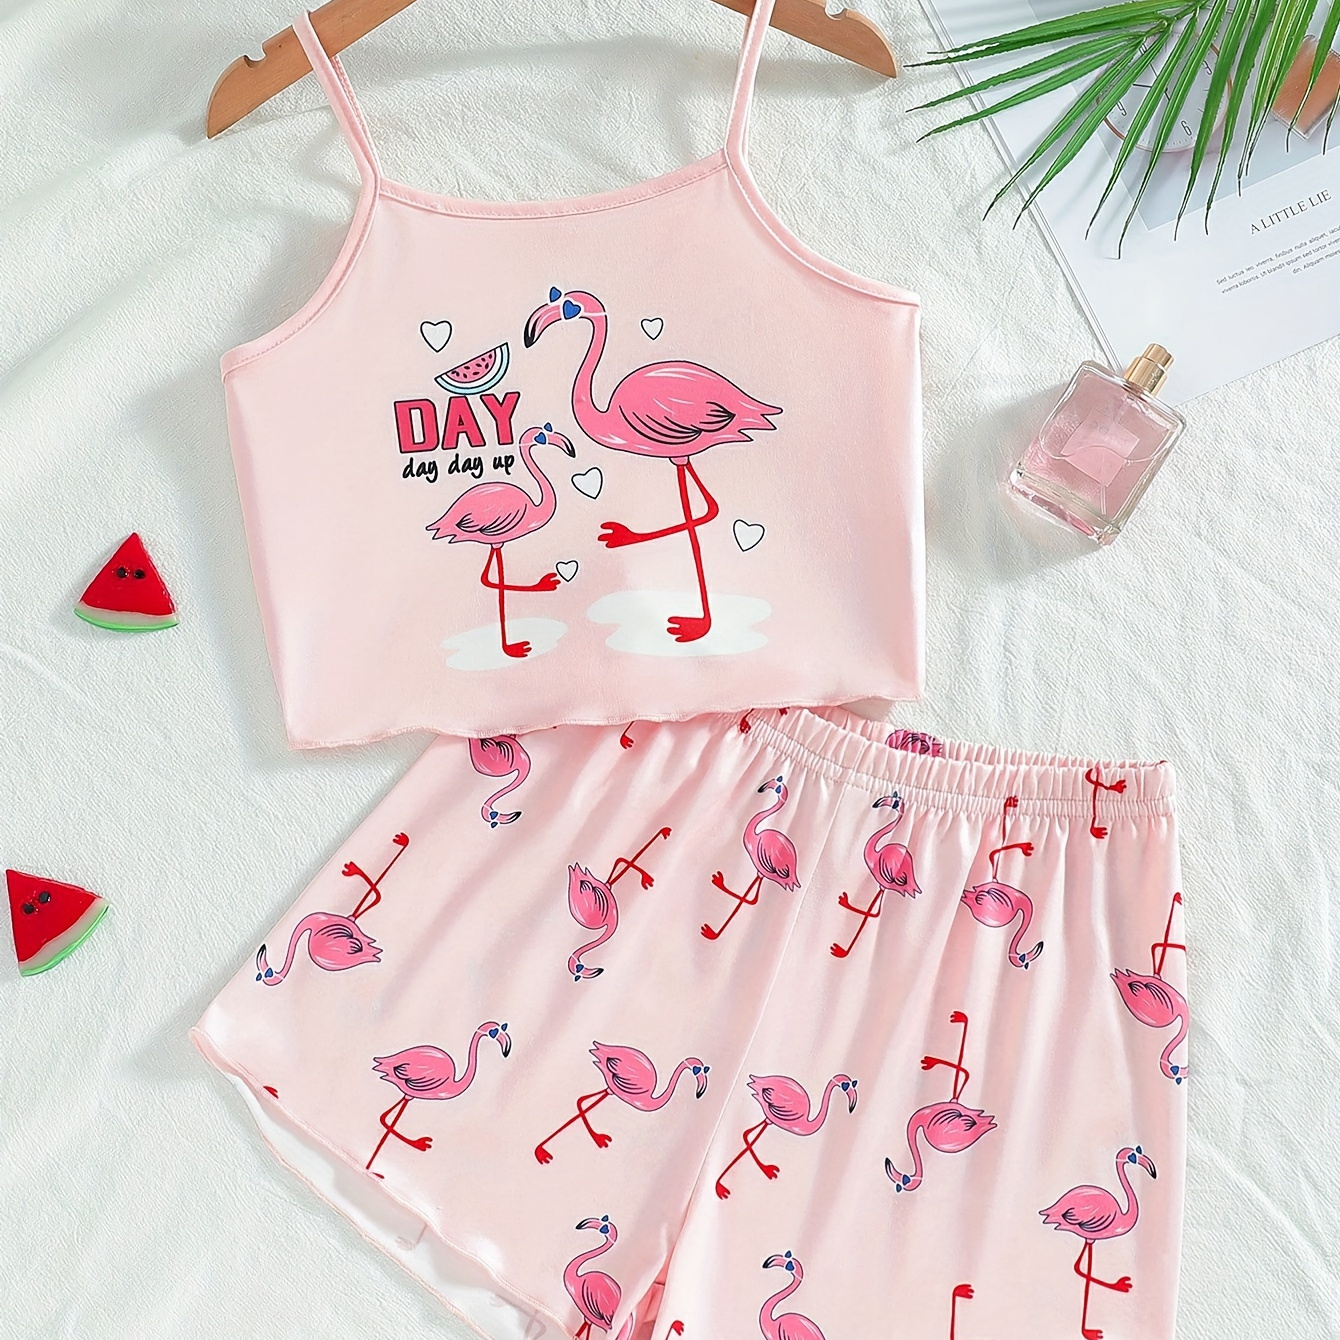 

Girls' 2-piece Flamingo Print Camisole Top And Printed Shorts Set, Cute Summer Casual Vacation Style Loungewear Outfit